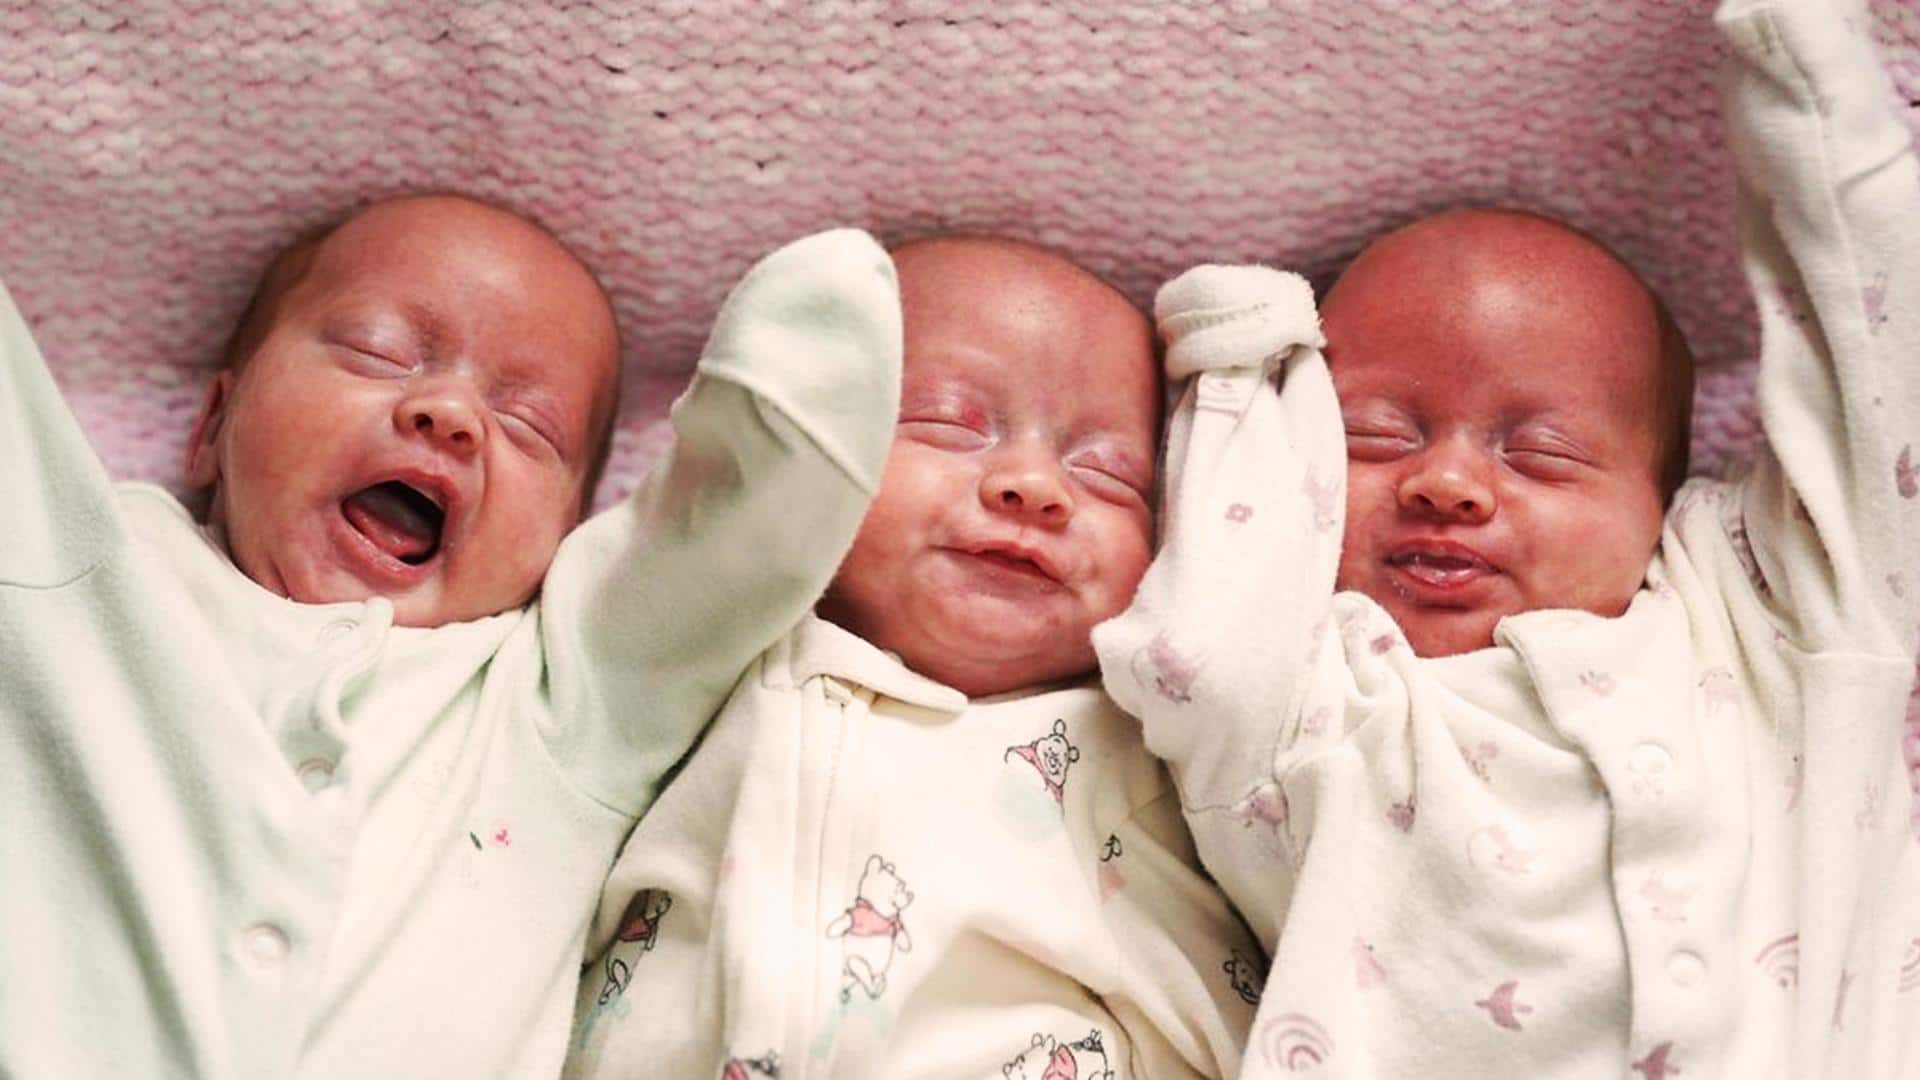 Couple defies 1 in 200 million odds, welcomes identical triplets